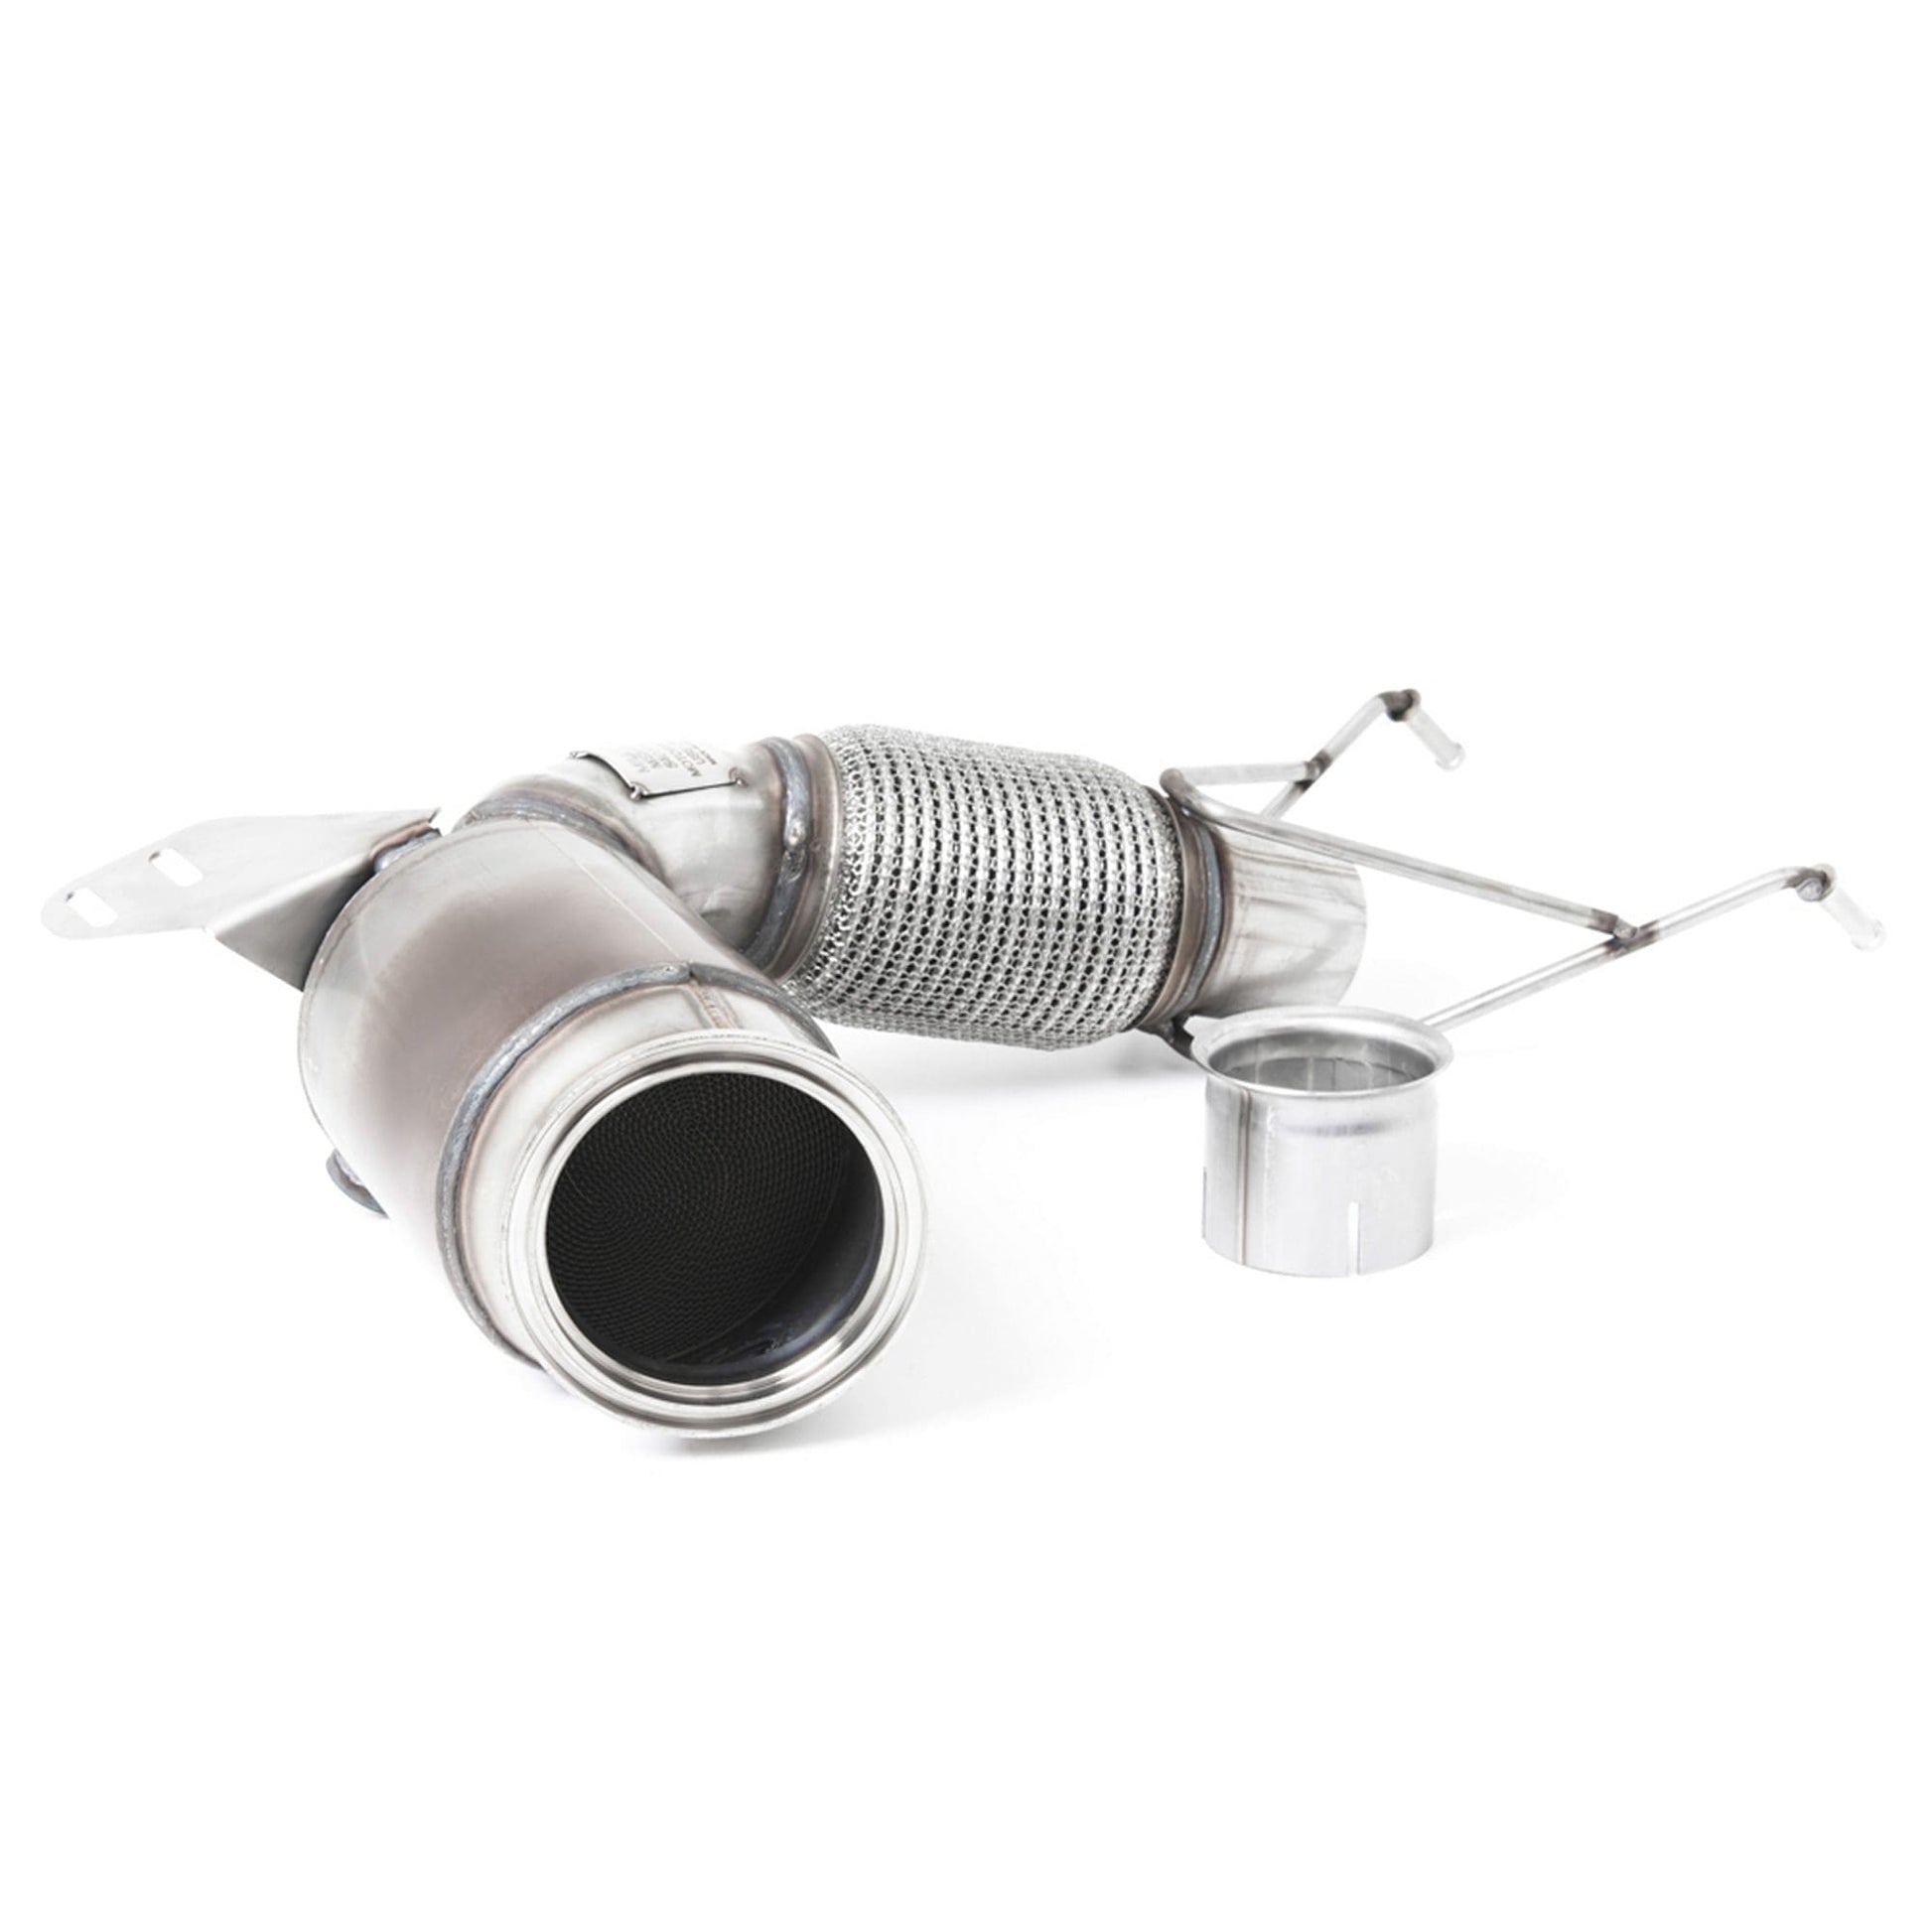 MANHART MH5MINI13102 DOWNPIPE SPORT FOR MINI F5X FACELIFT MCS / JCW / GP3 WITH 200 CELLS CATALYTIC CONVERTER